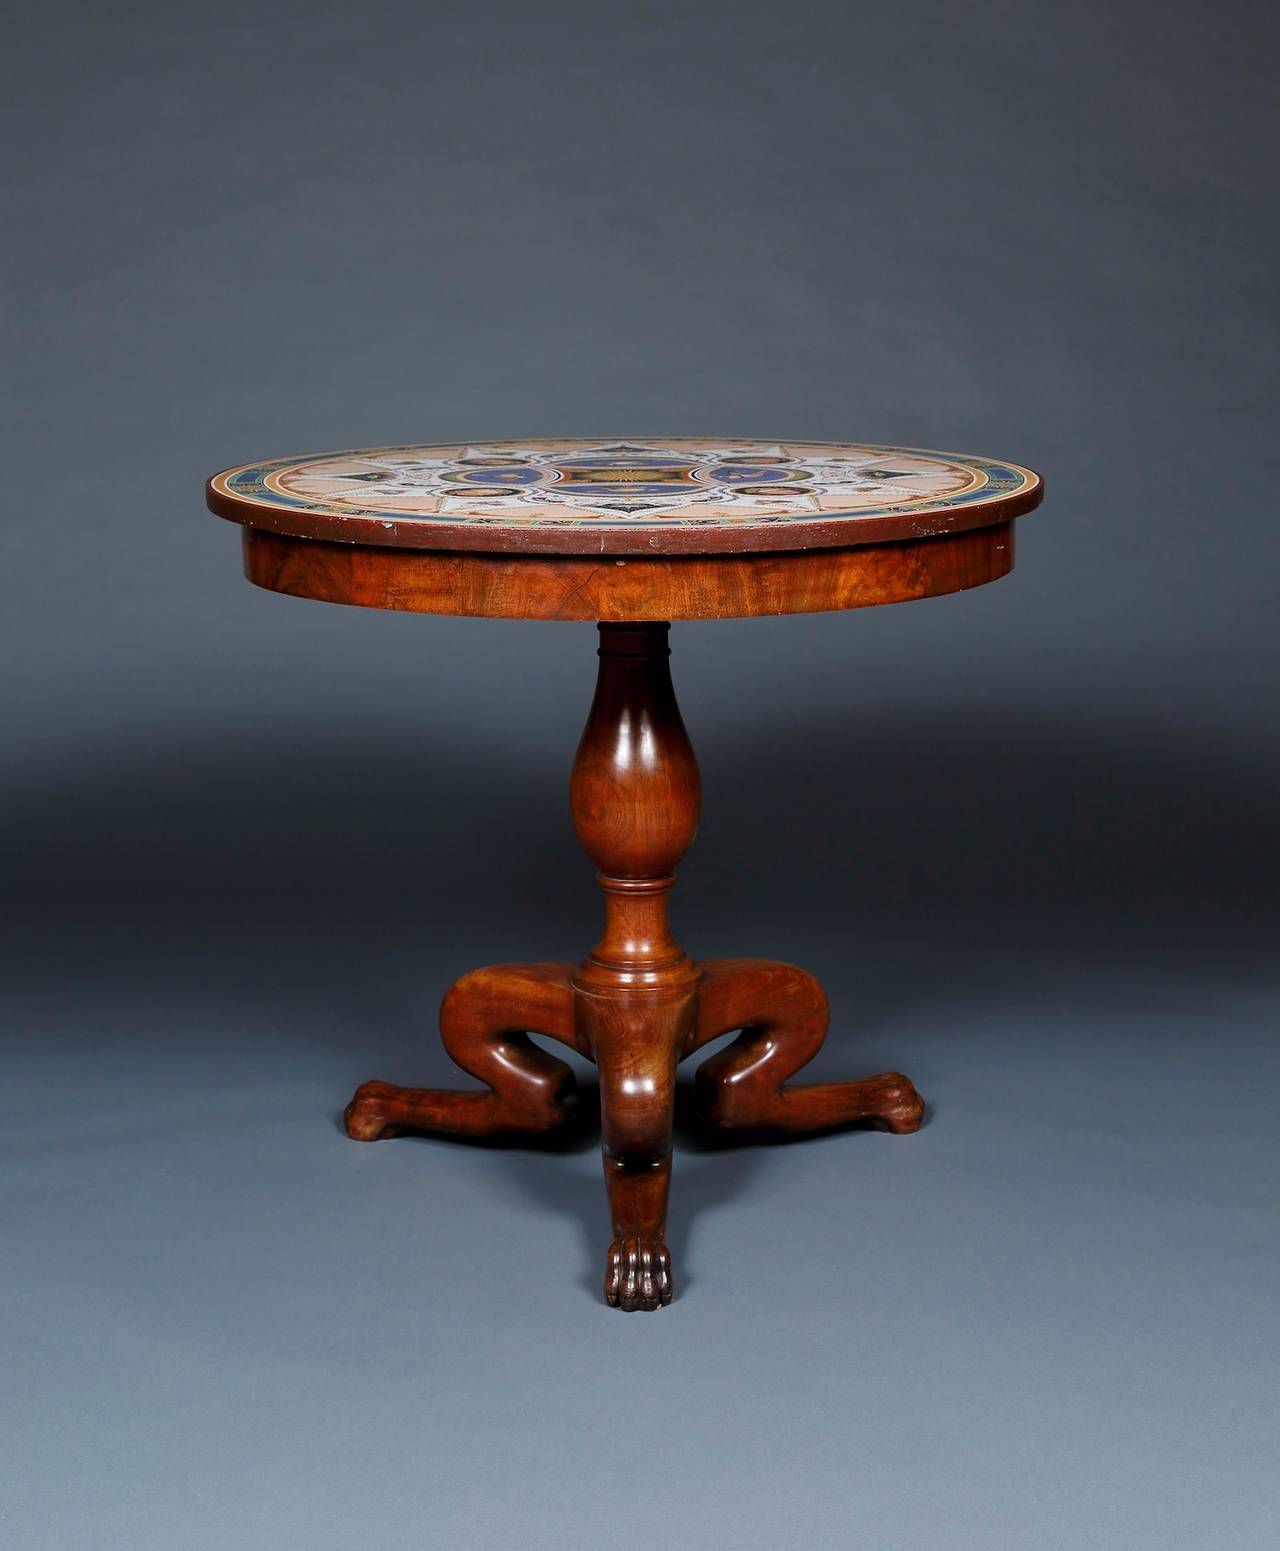 A VERY RARE POLYCHROME CIRCULAR TABLE-TOP EN ÉMAIL SUR LAVE DE VOLVIC DESIGNED BY JACQUES IGNACE HITTORFF AND MANUFACTURED BY HACHETTE ET CIE, RETAINING ITS ORIGINAL CARVED MAHOGANY TABLE BASE

The top decorated with Pompeian style grotesques,